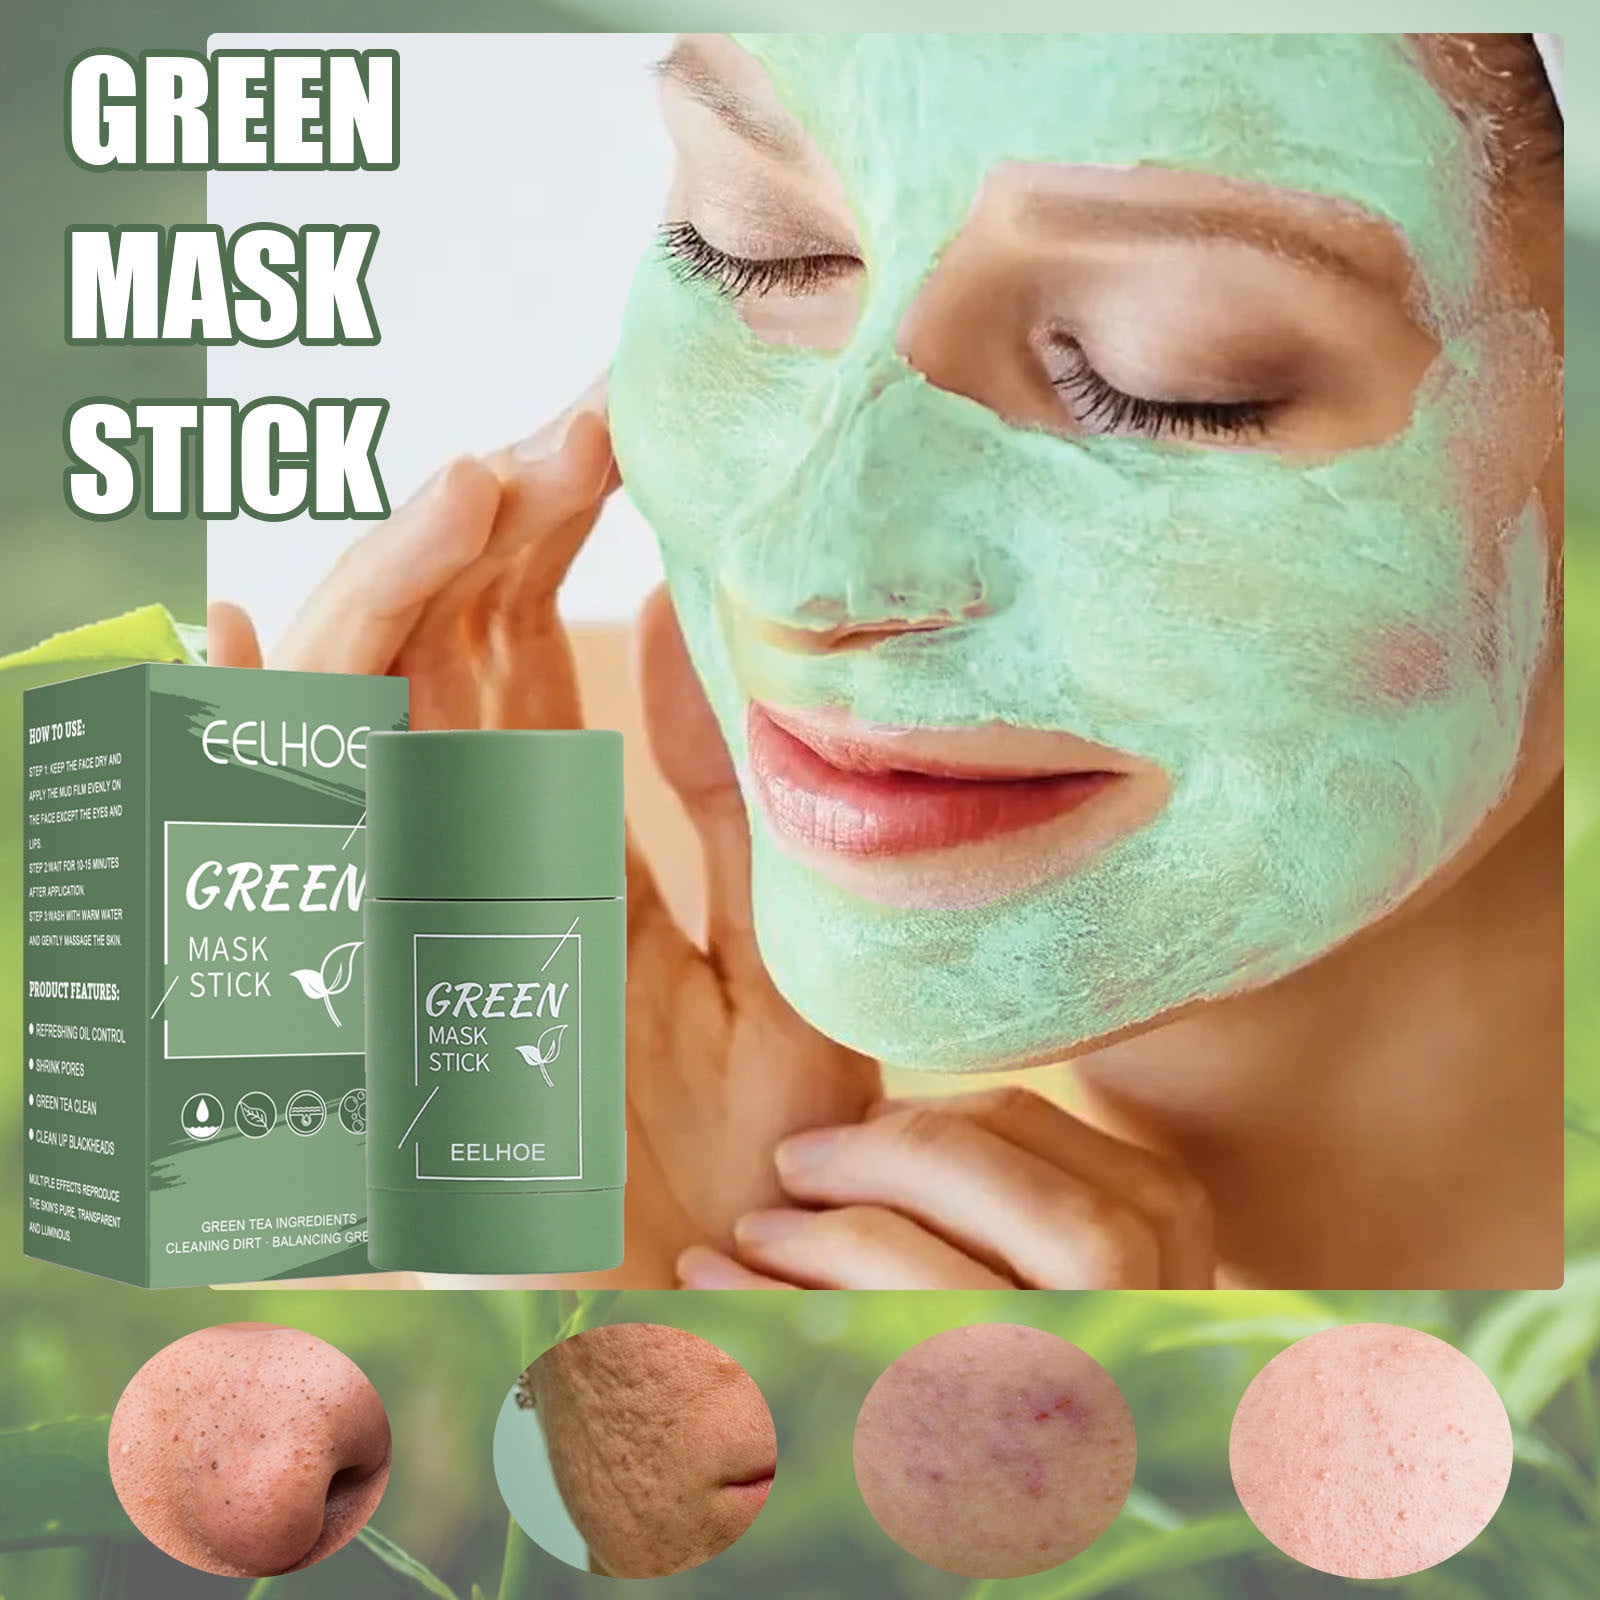 Green Tea Deep Cleanse Mask Review, Does it Work ?, Pocoskin Green Mask  Stick